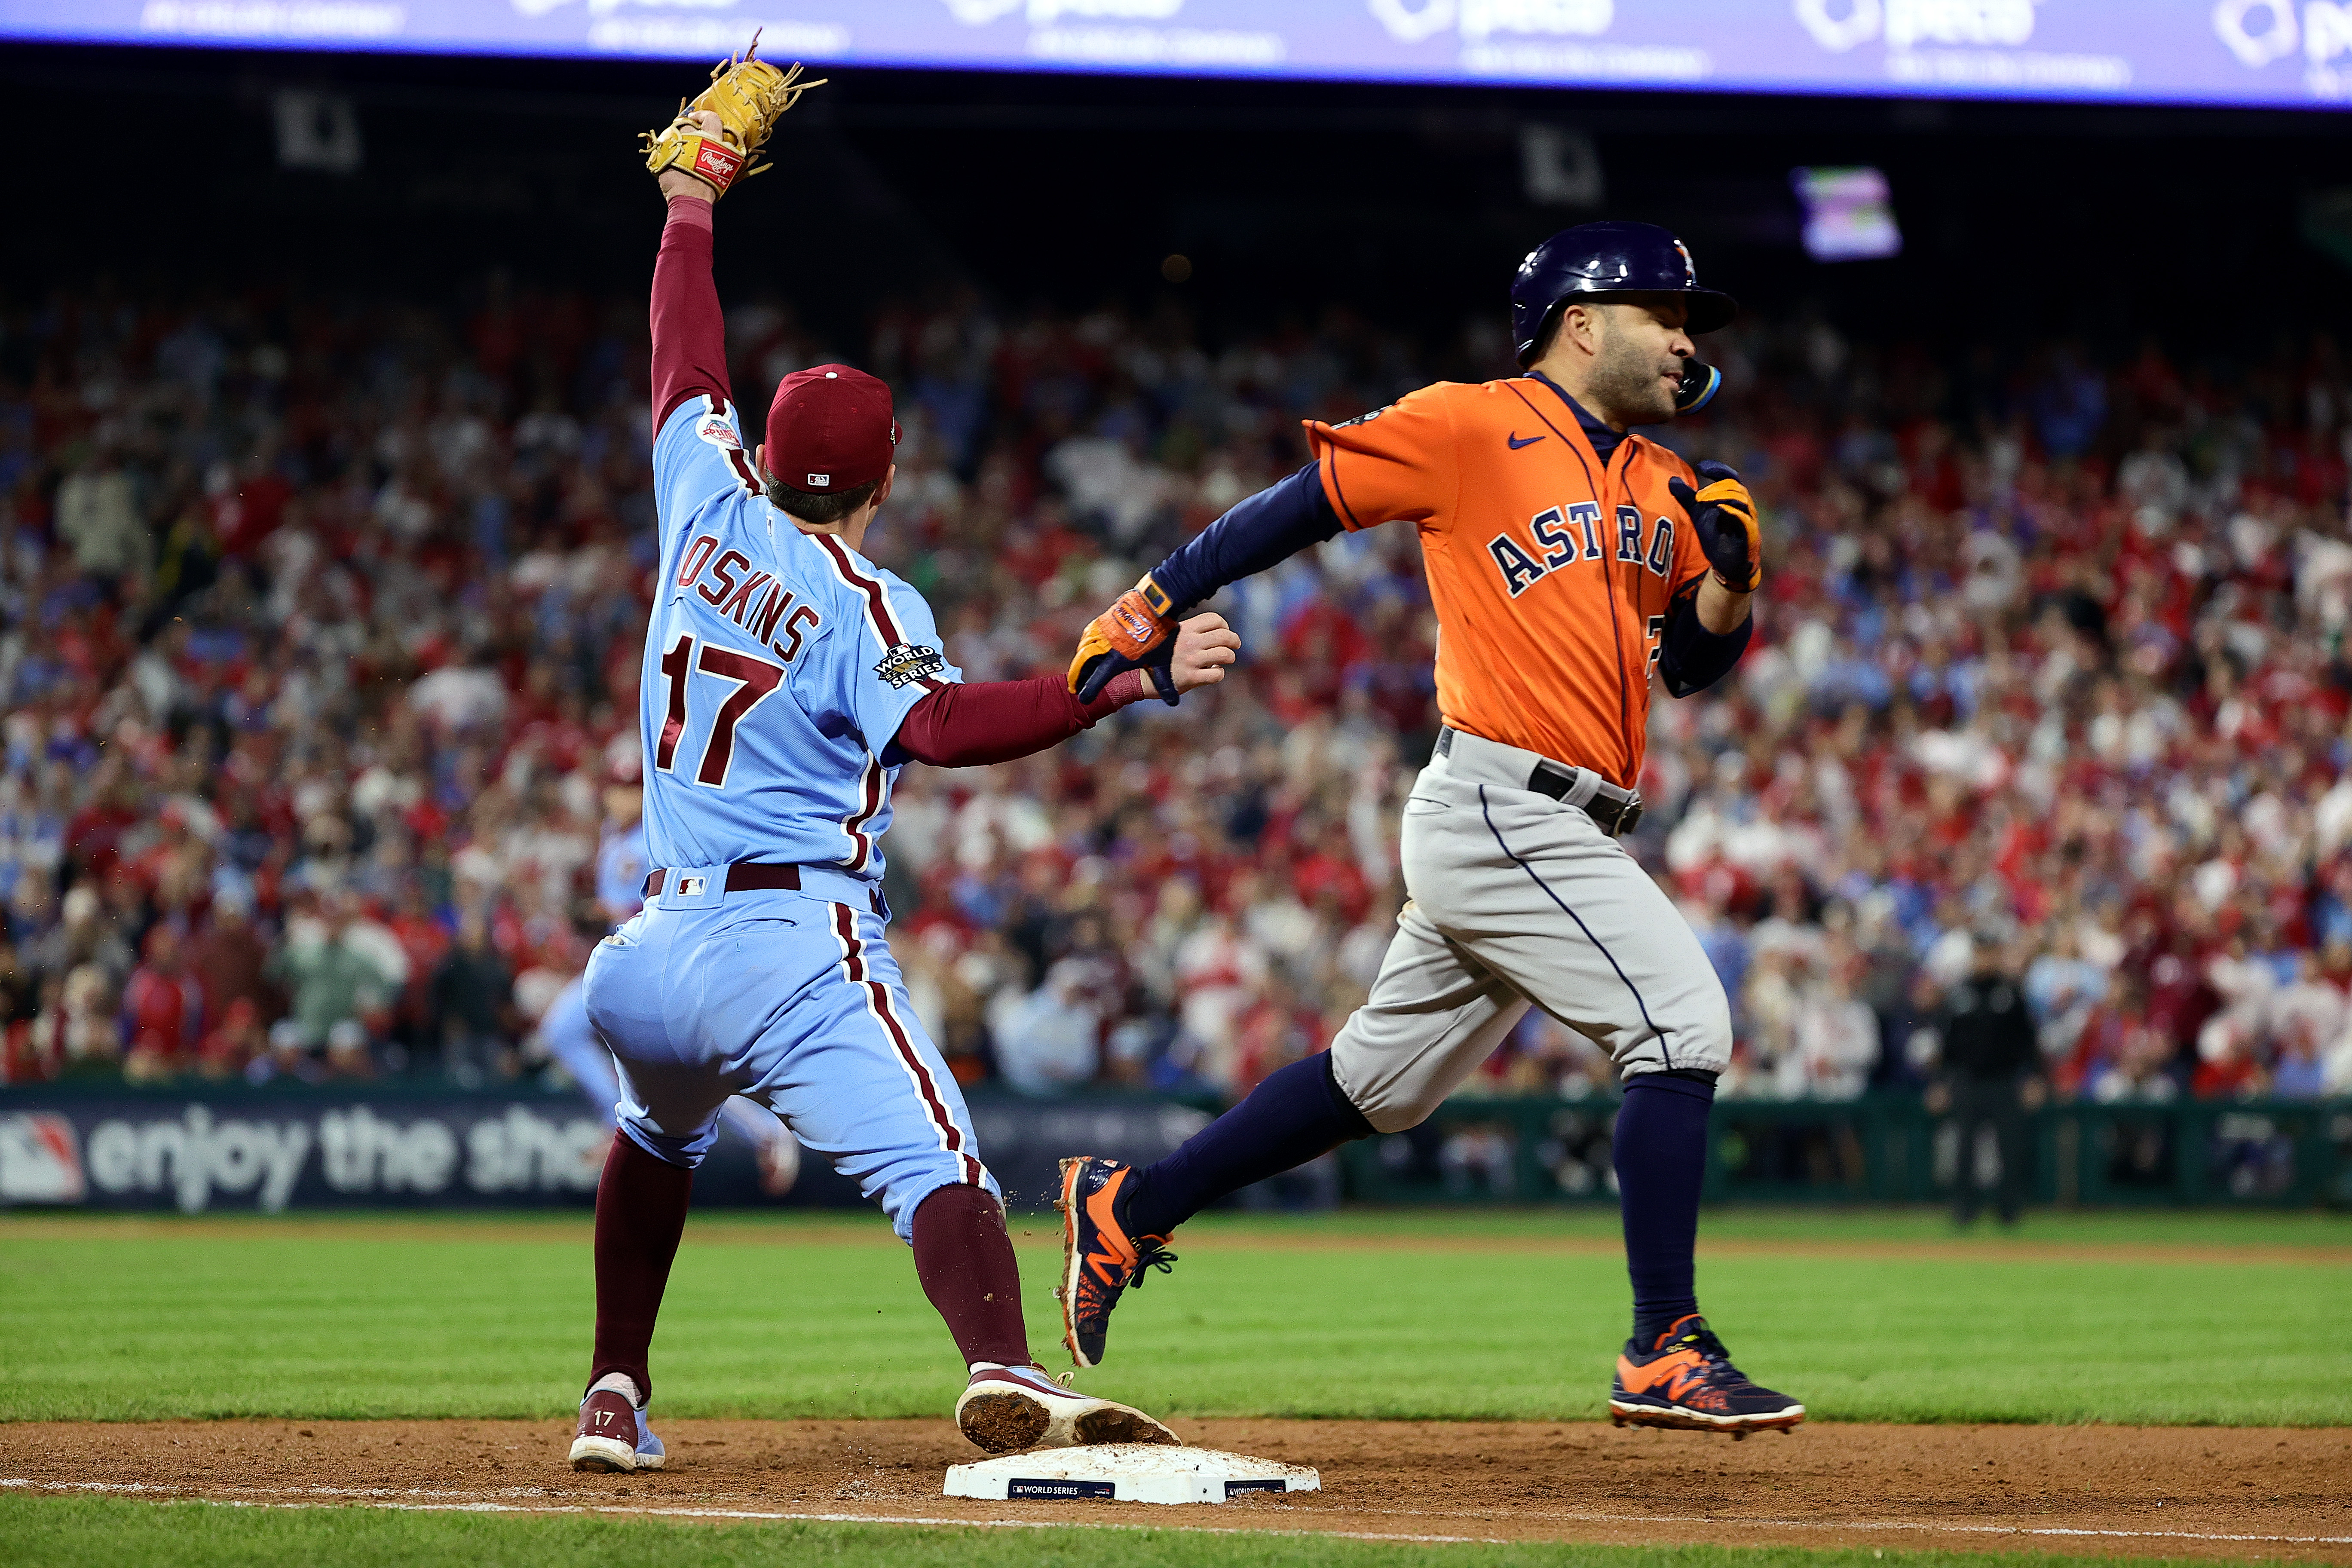 PHILADELPHIA, PENNSYLVANIA - NOVEMBER 03: Jose Altuve #27 of the Houston Astros is forced out at first base by Rhys Hoskins #17 of the Philadelphia Phillies during the ninth inning in Game Five of the 2022 World Series at Citizens Bank Park on November 03, 2022 in Philadelphia, Pennsylvania.